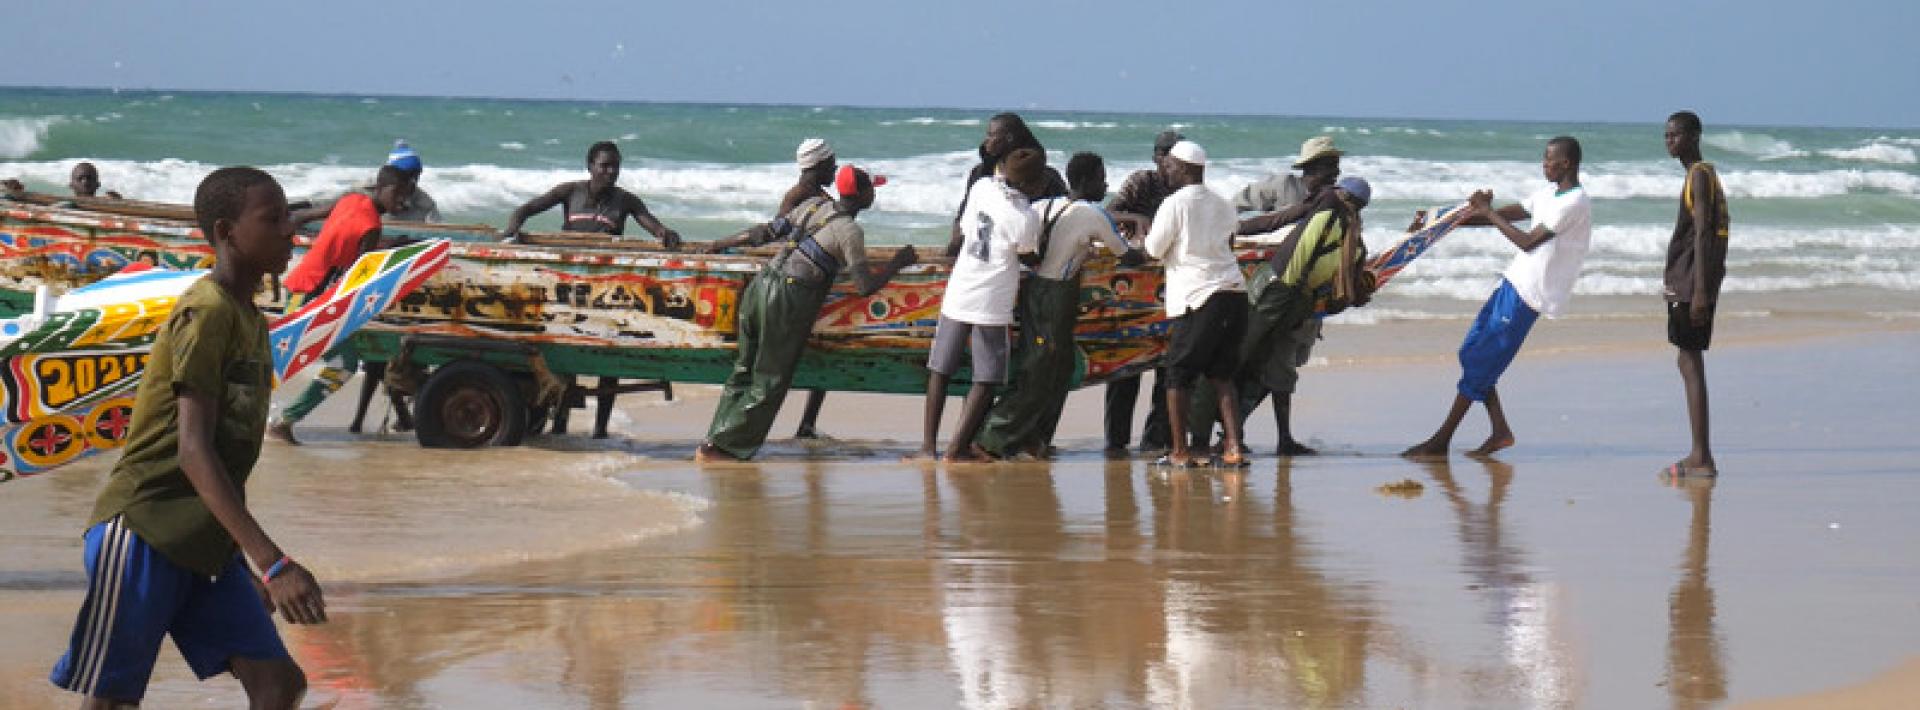 Men grab large fishing boats and pull them onto the shore of the beach in Dakar, Senegal